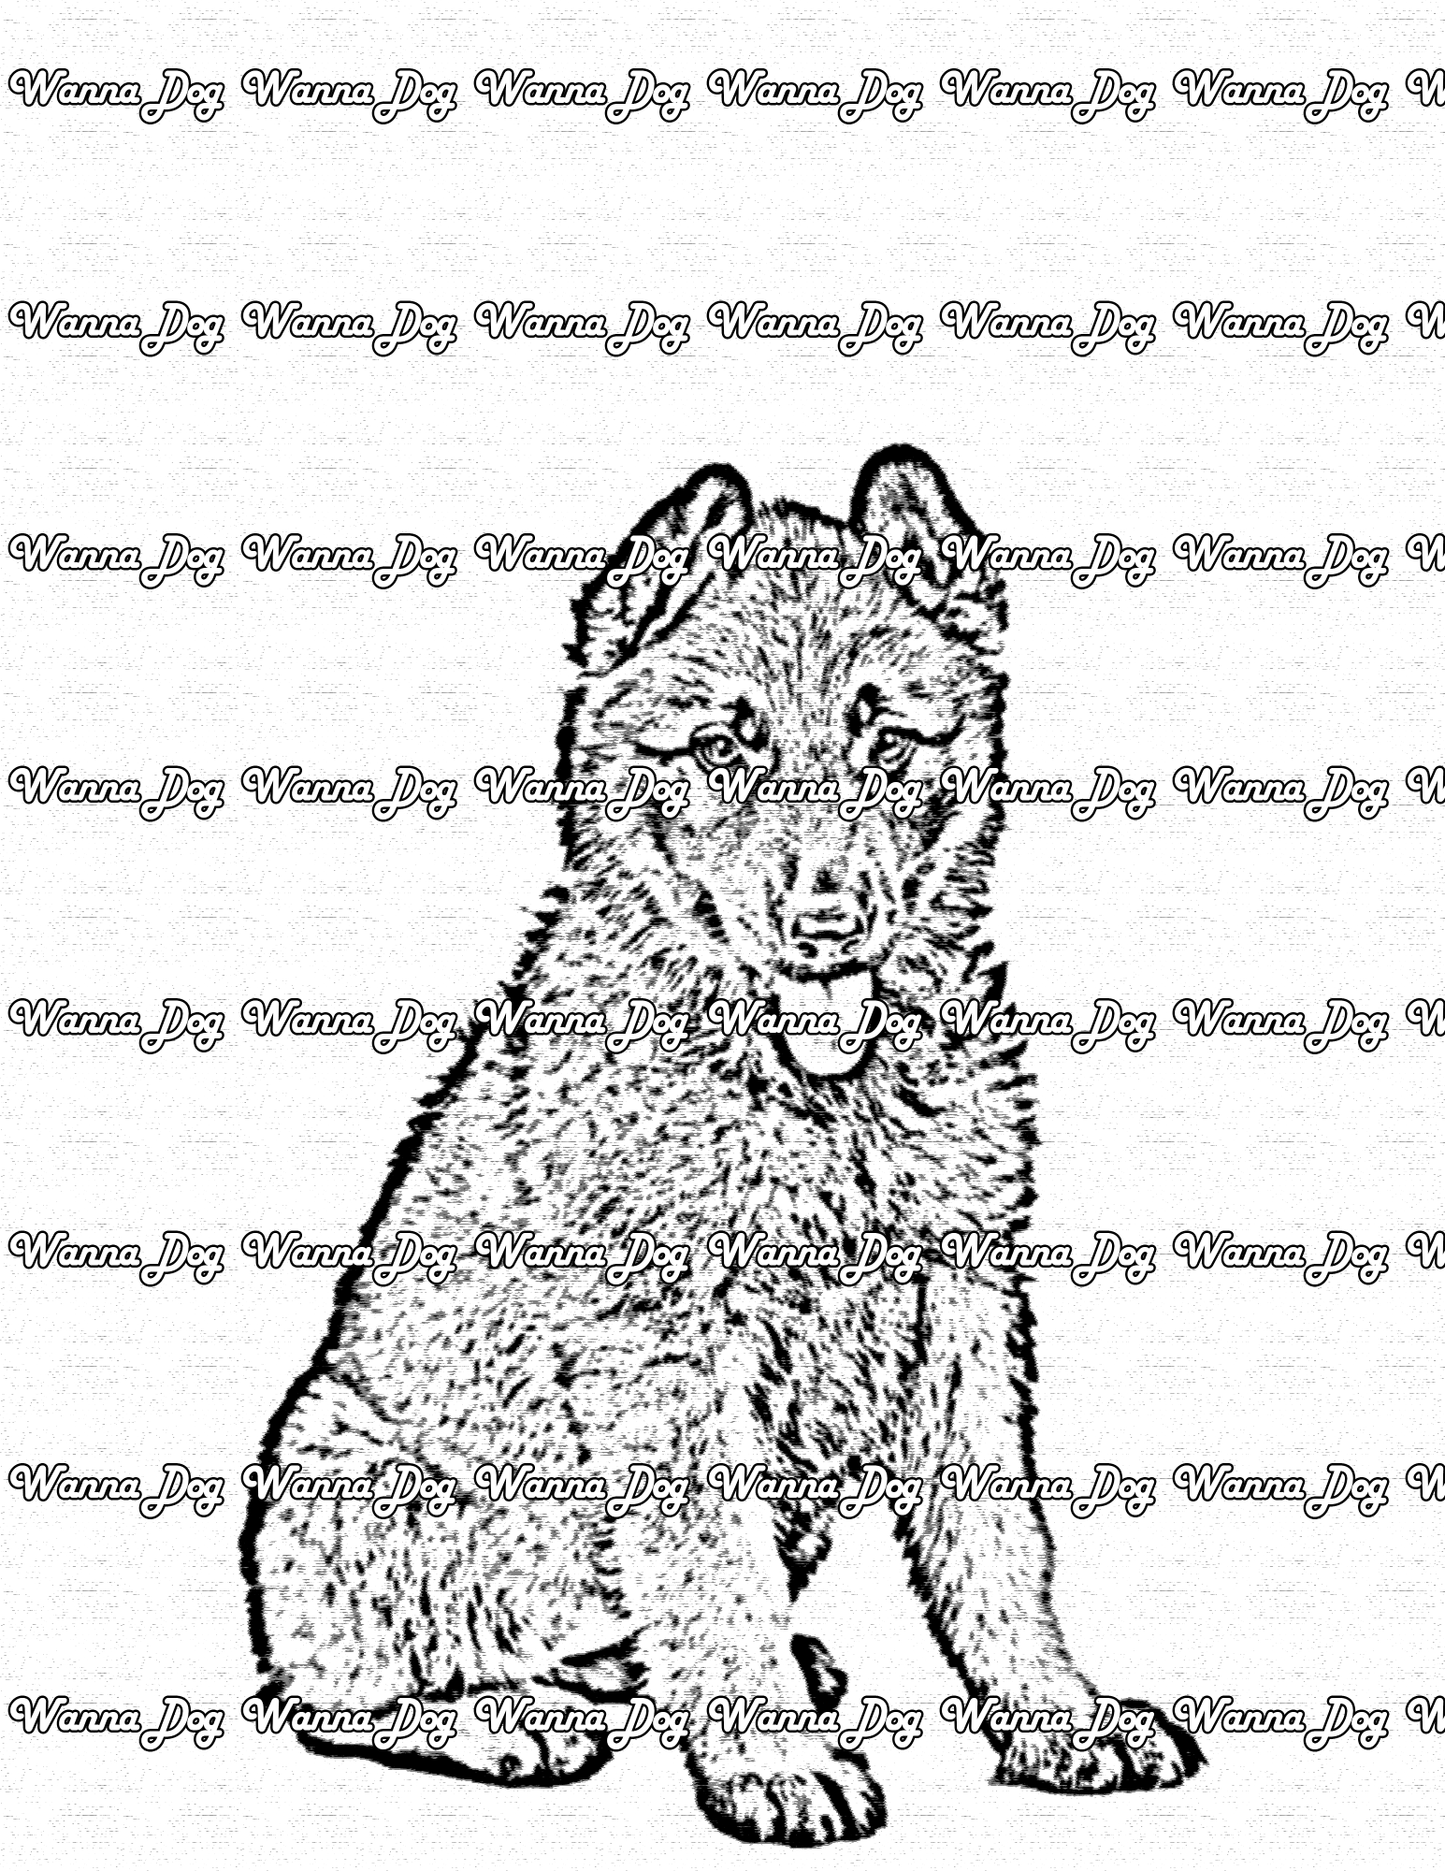 German Shepherd Puppy Coloring Pages of a German Shepherd Puppy sitting down with their tongue out